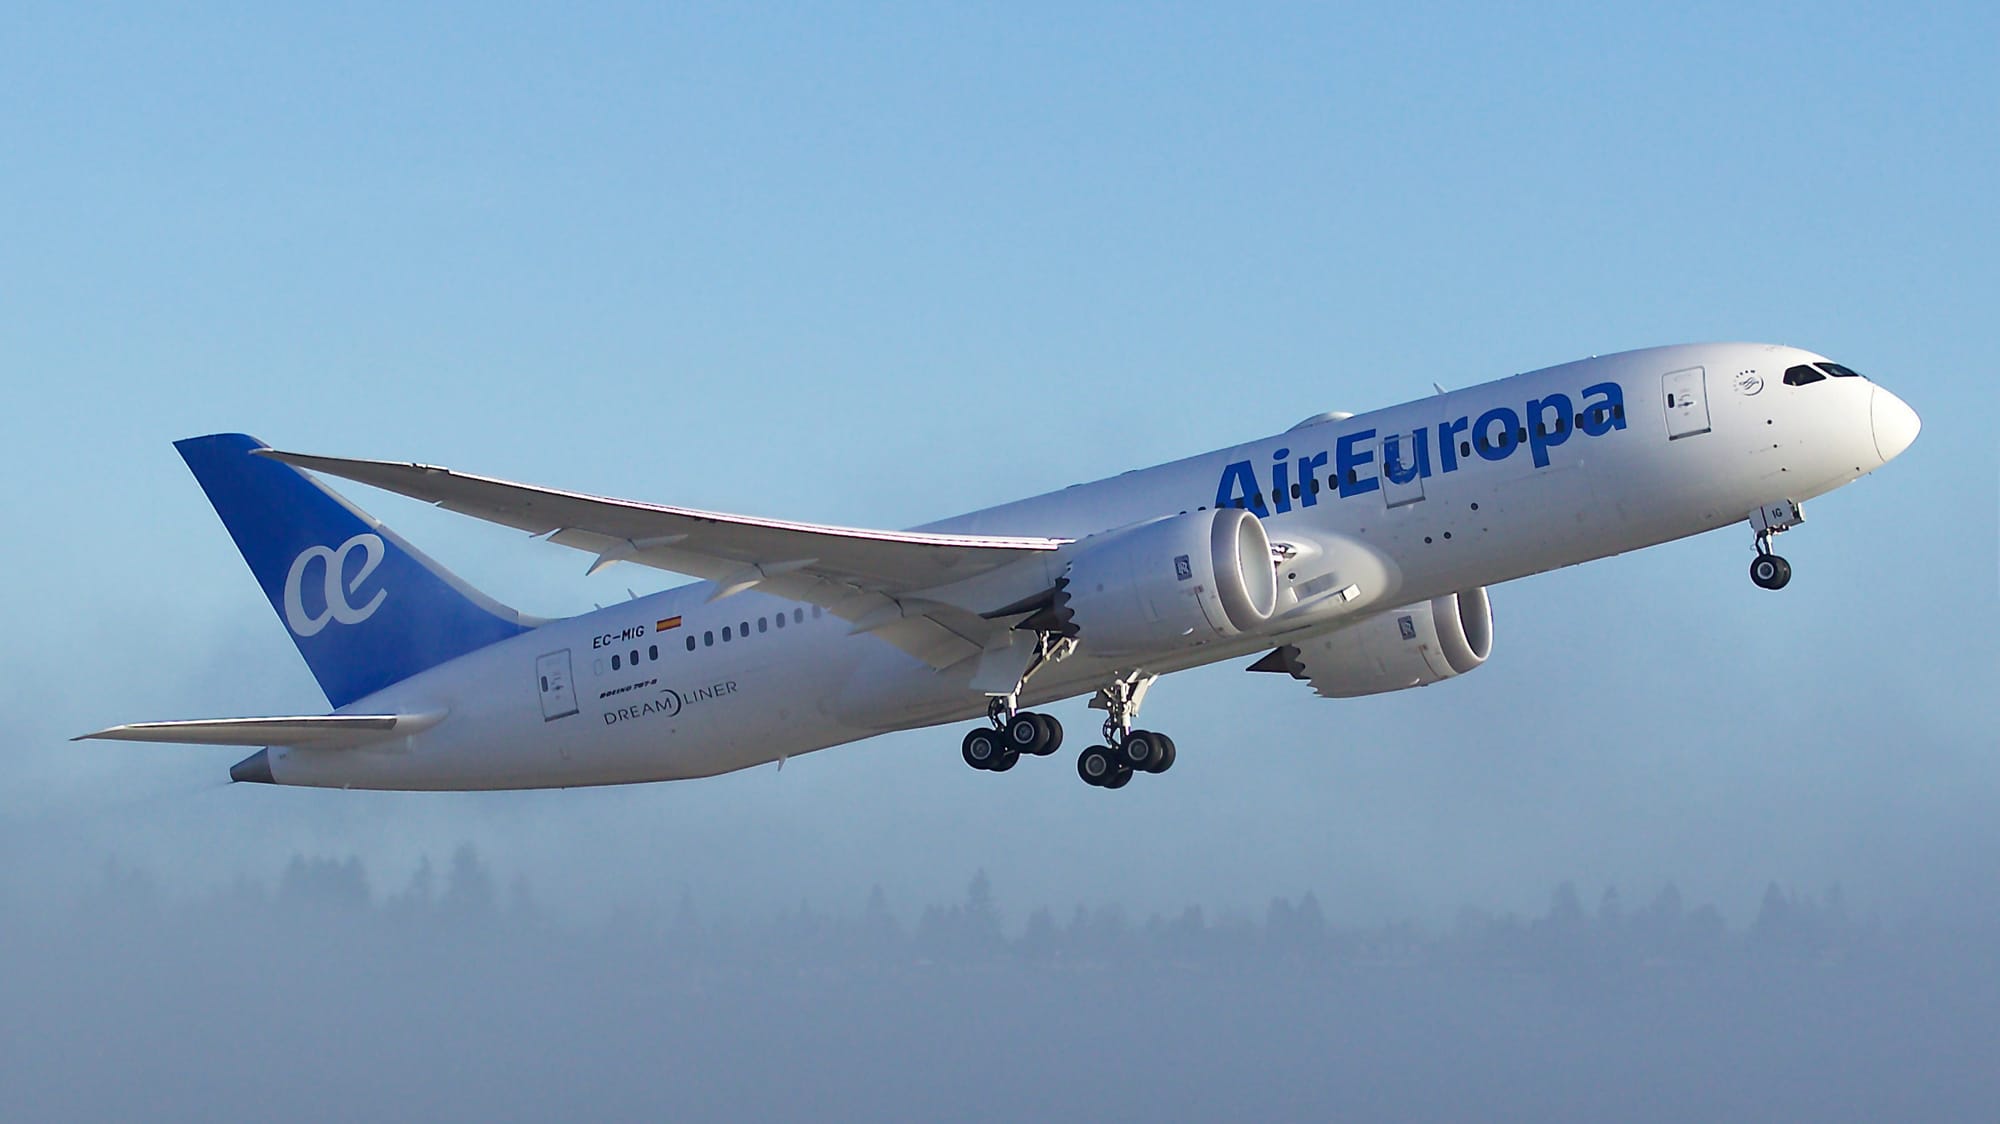 Commission opens in-depth investigation into proposed acquisition of Air Europa by IAG